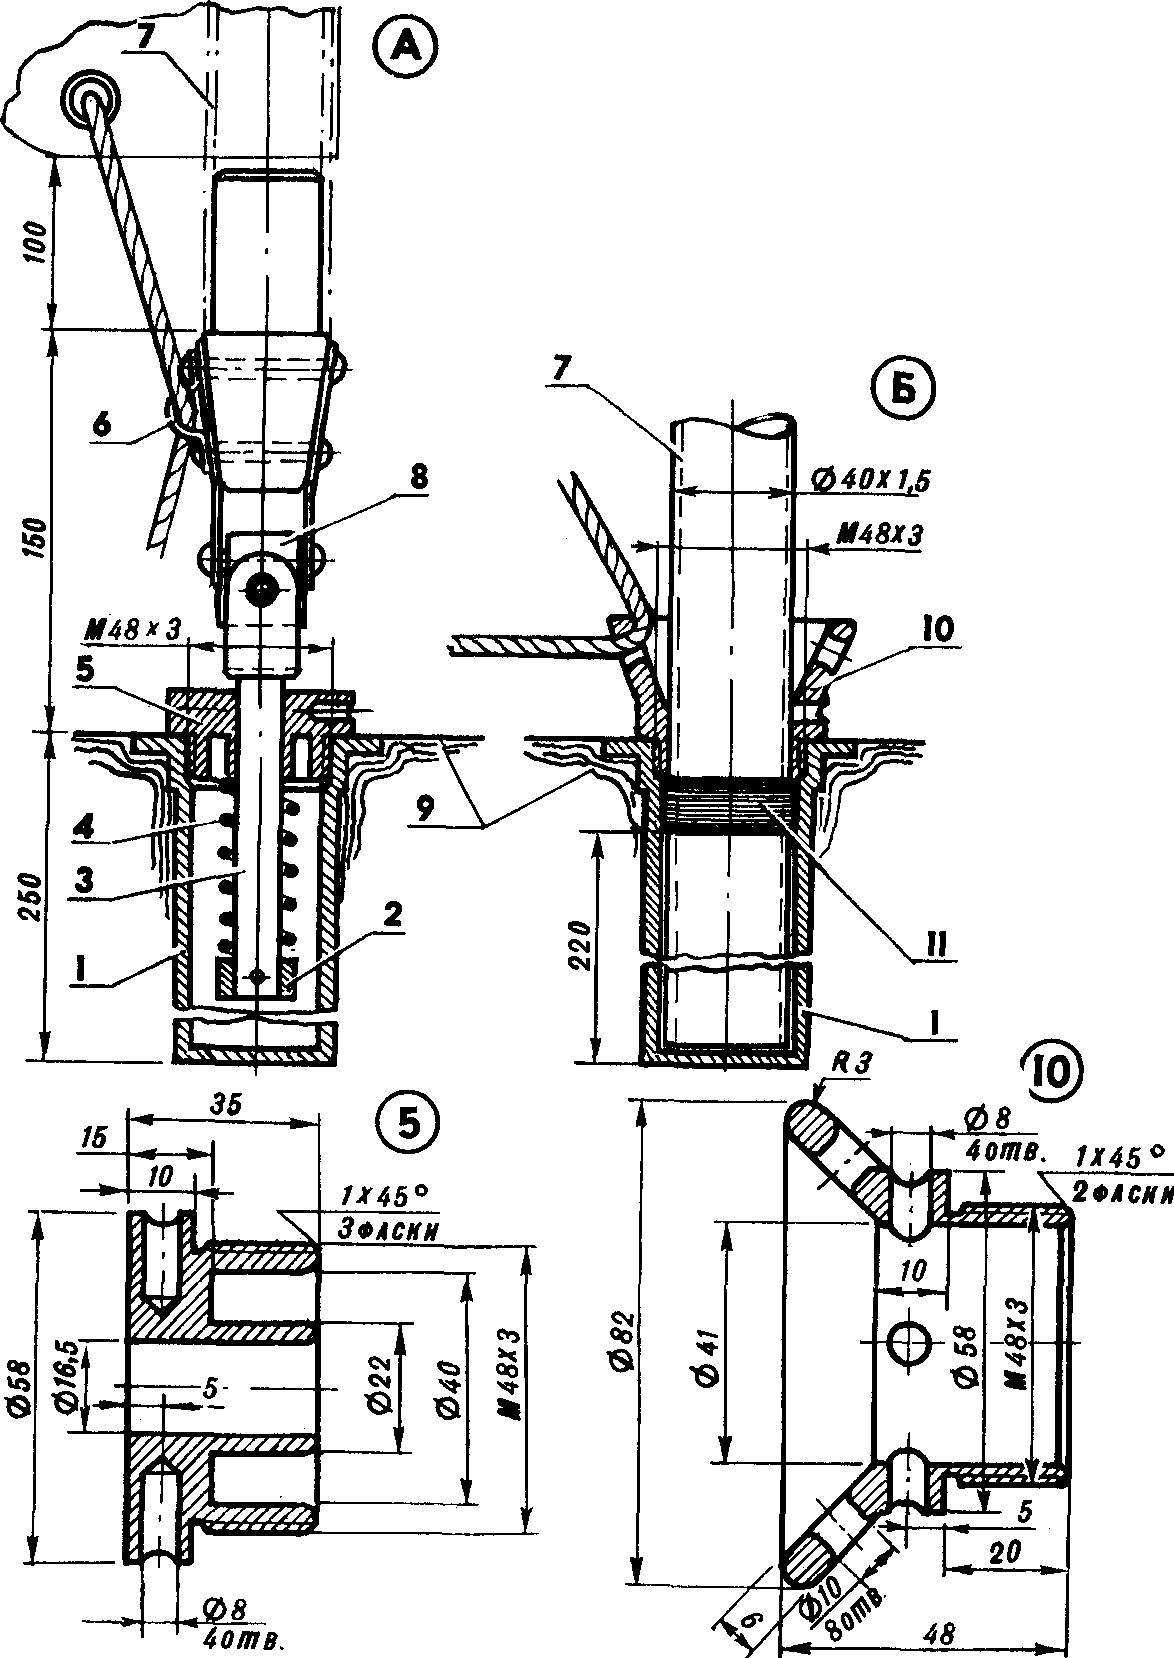 Fig. 9. The attachment of the mast to the hull.